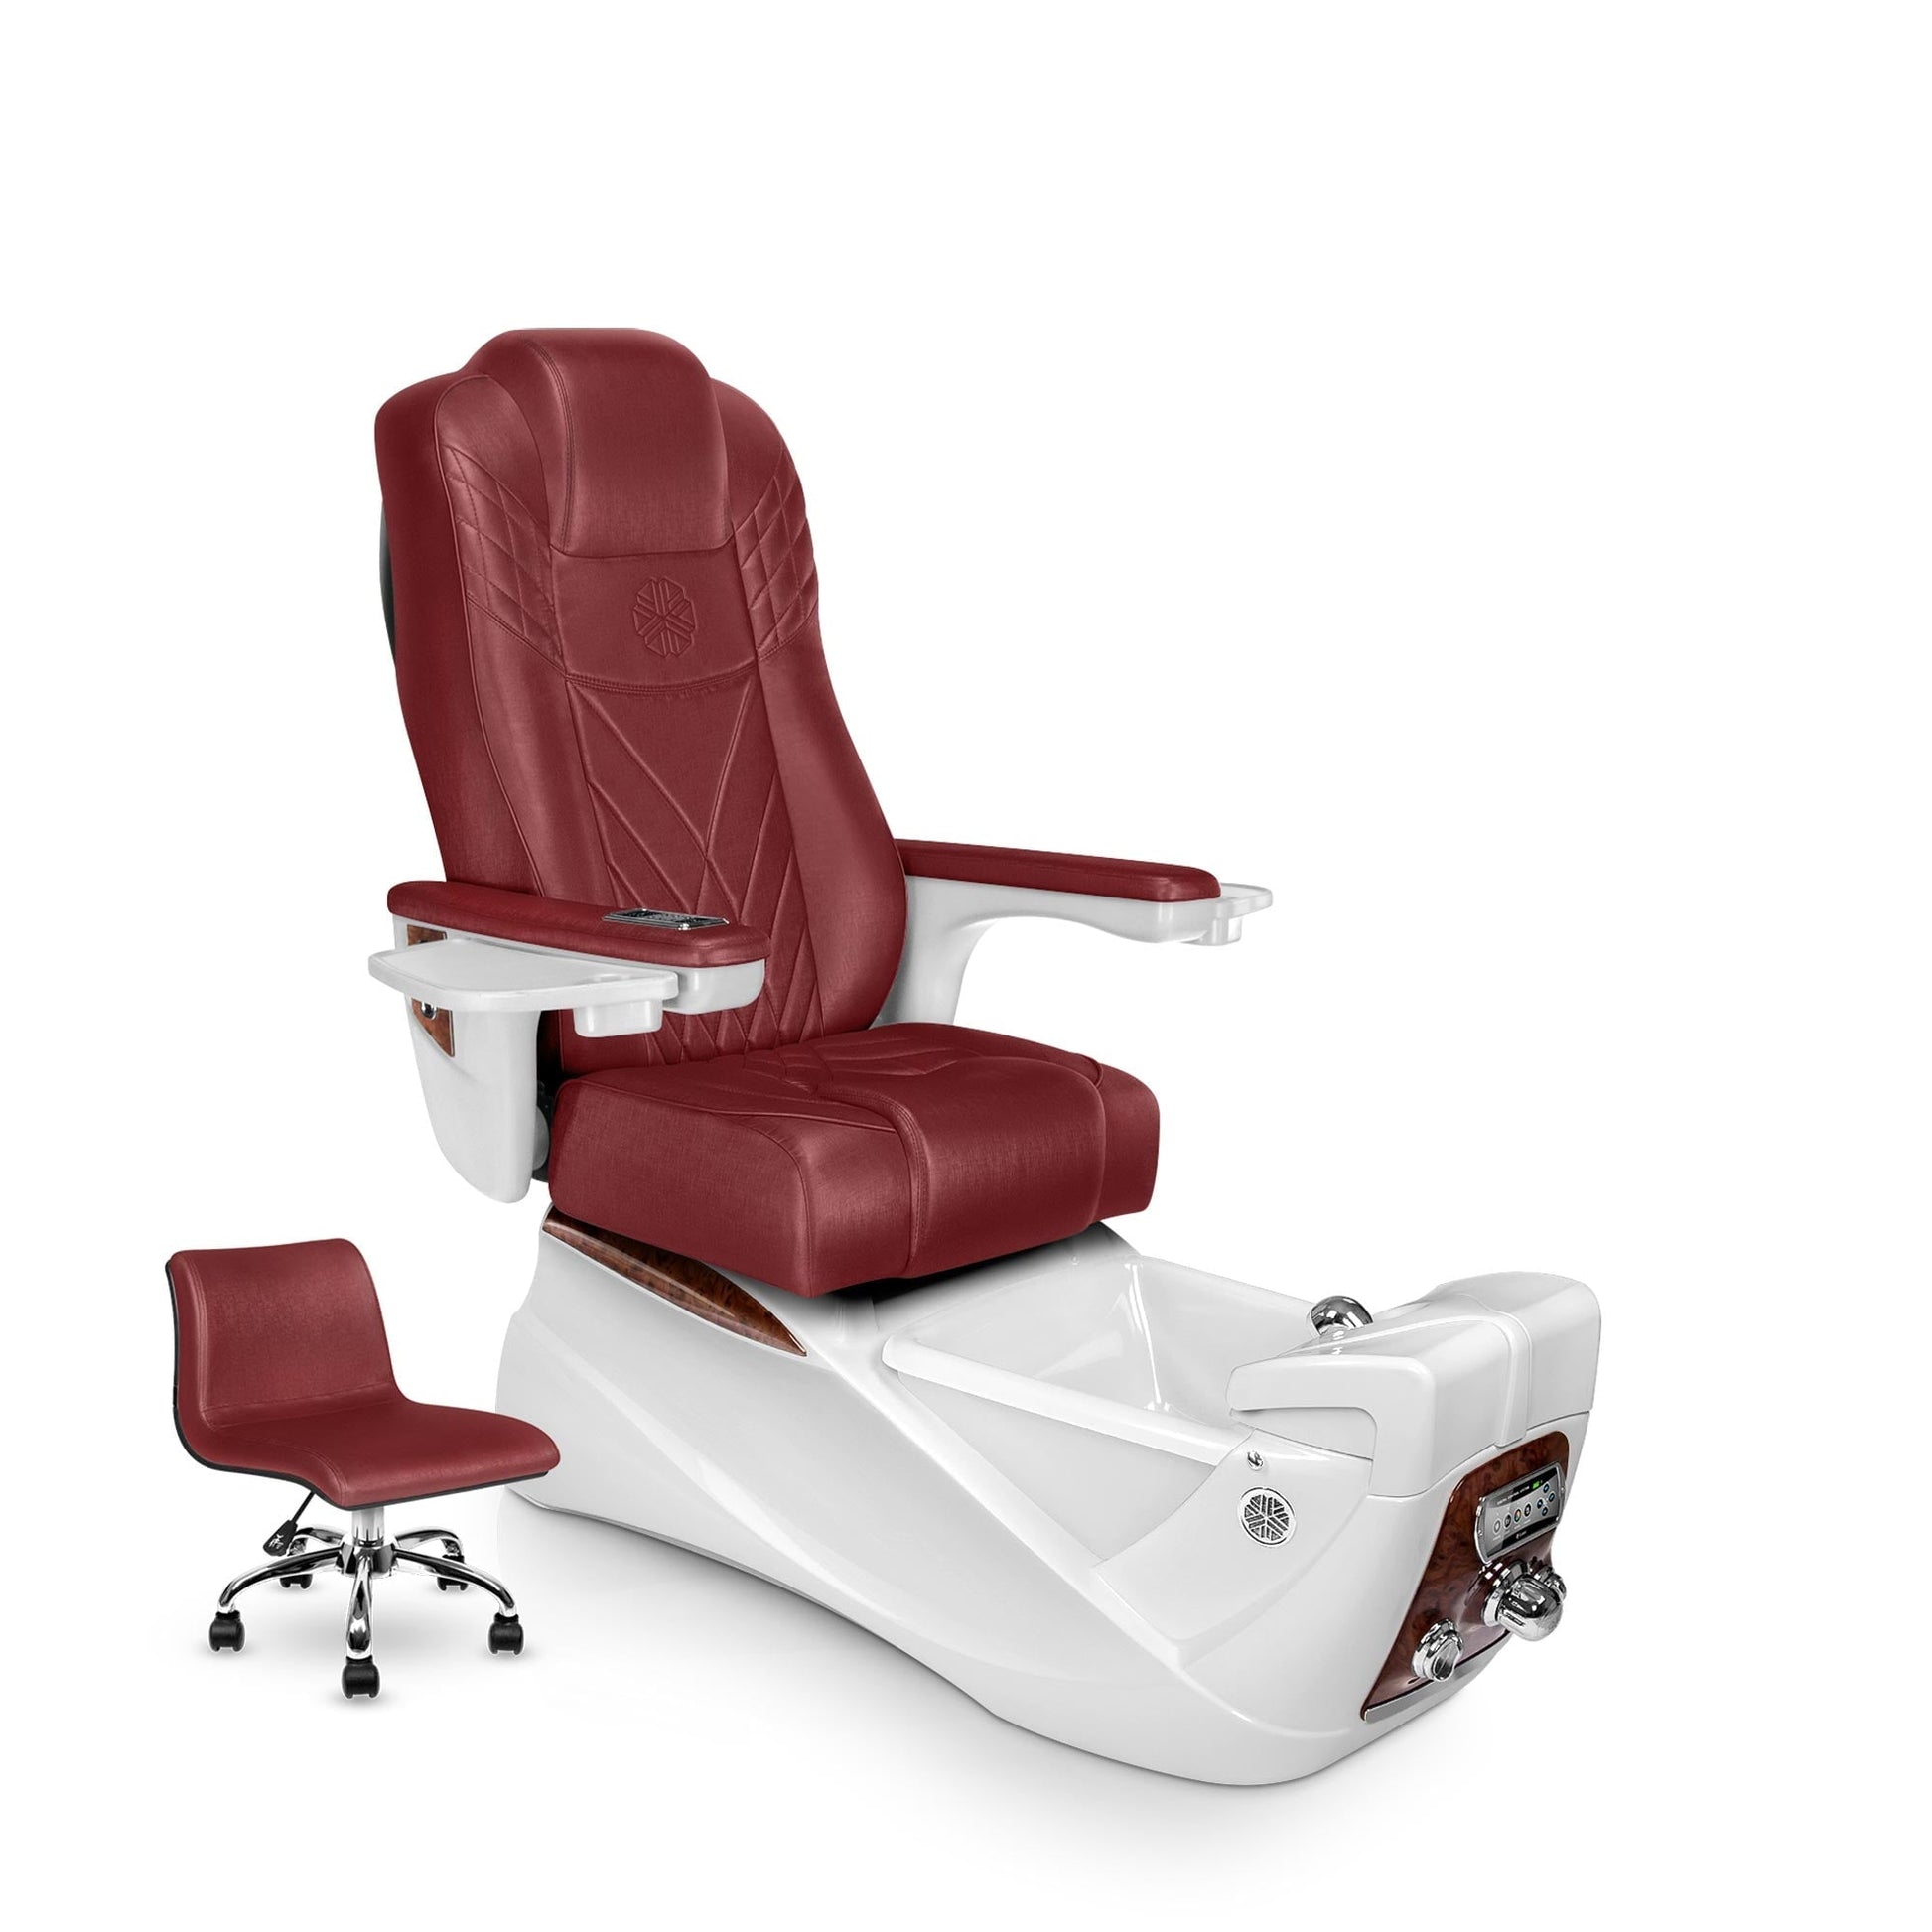 Lexor INFINITY pedicure chair with ruby cushion and white pearl spa base